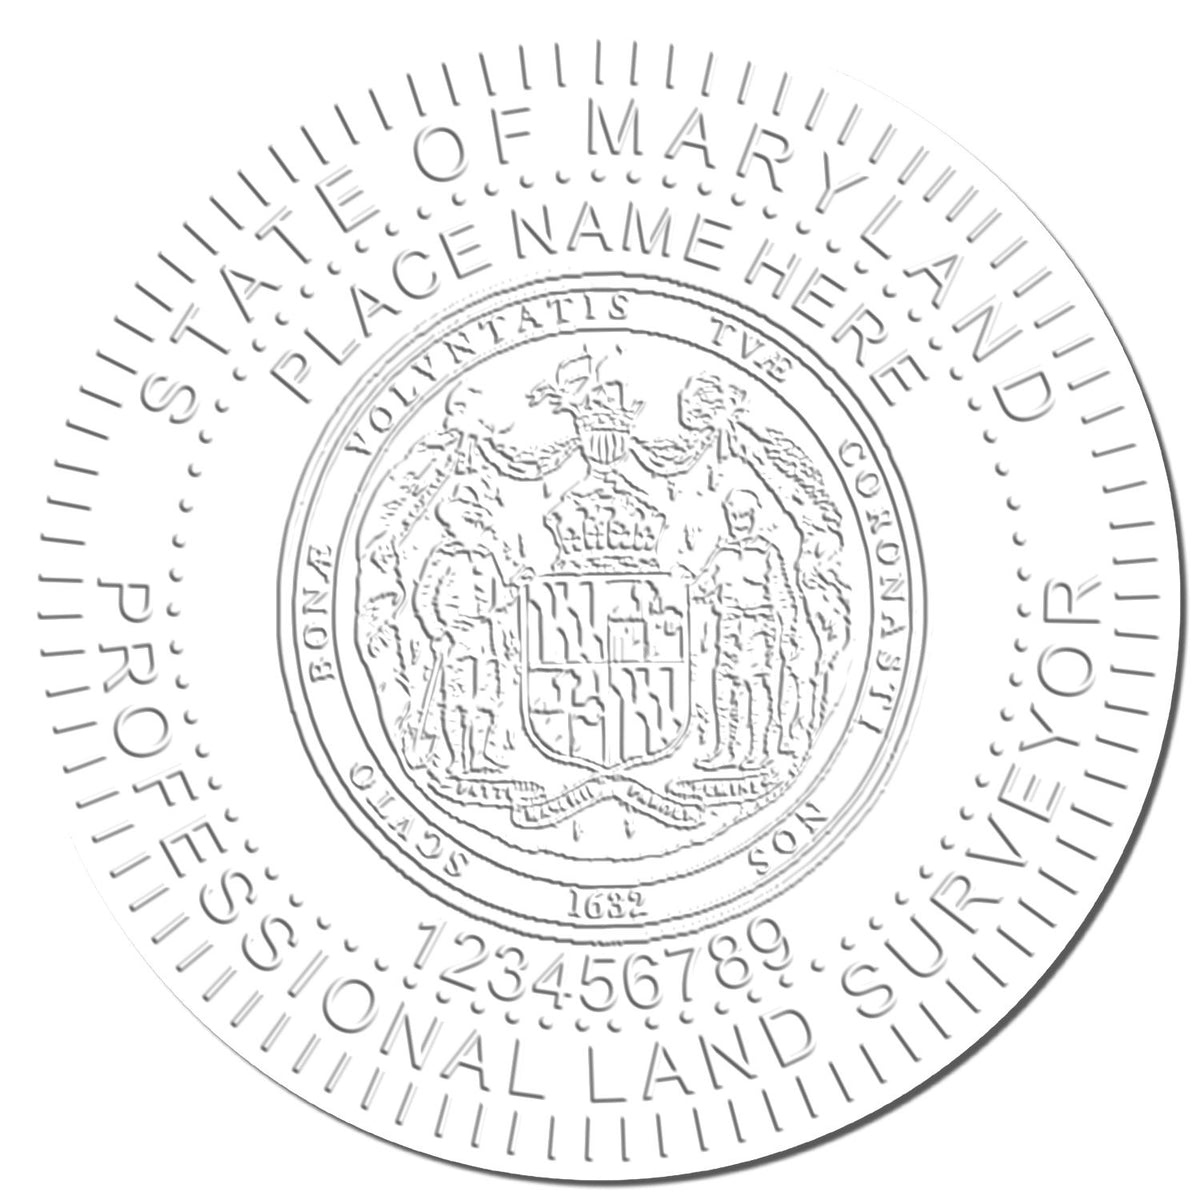 This paper is stamped with a sample imprint of the State of Maryland Soft Land Surveyor Embossing Seal, signifying its quality and reliability.